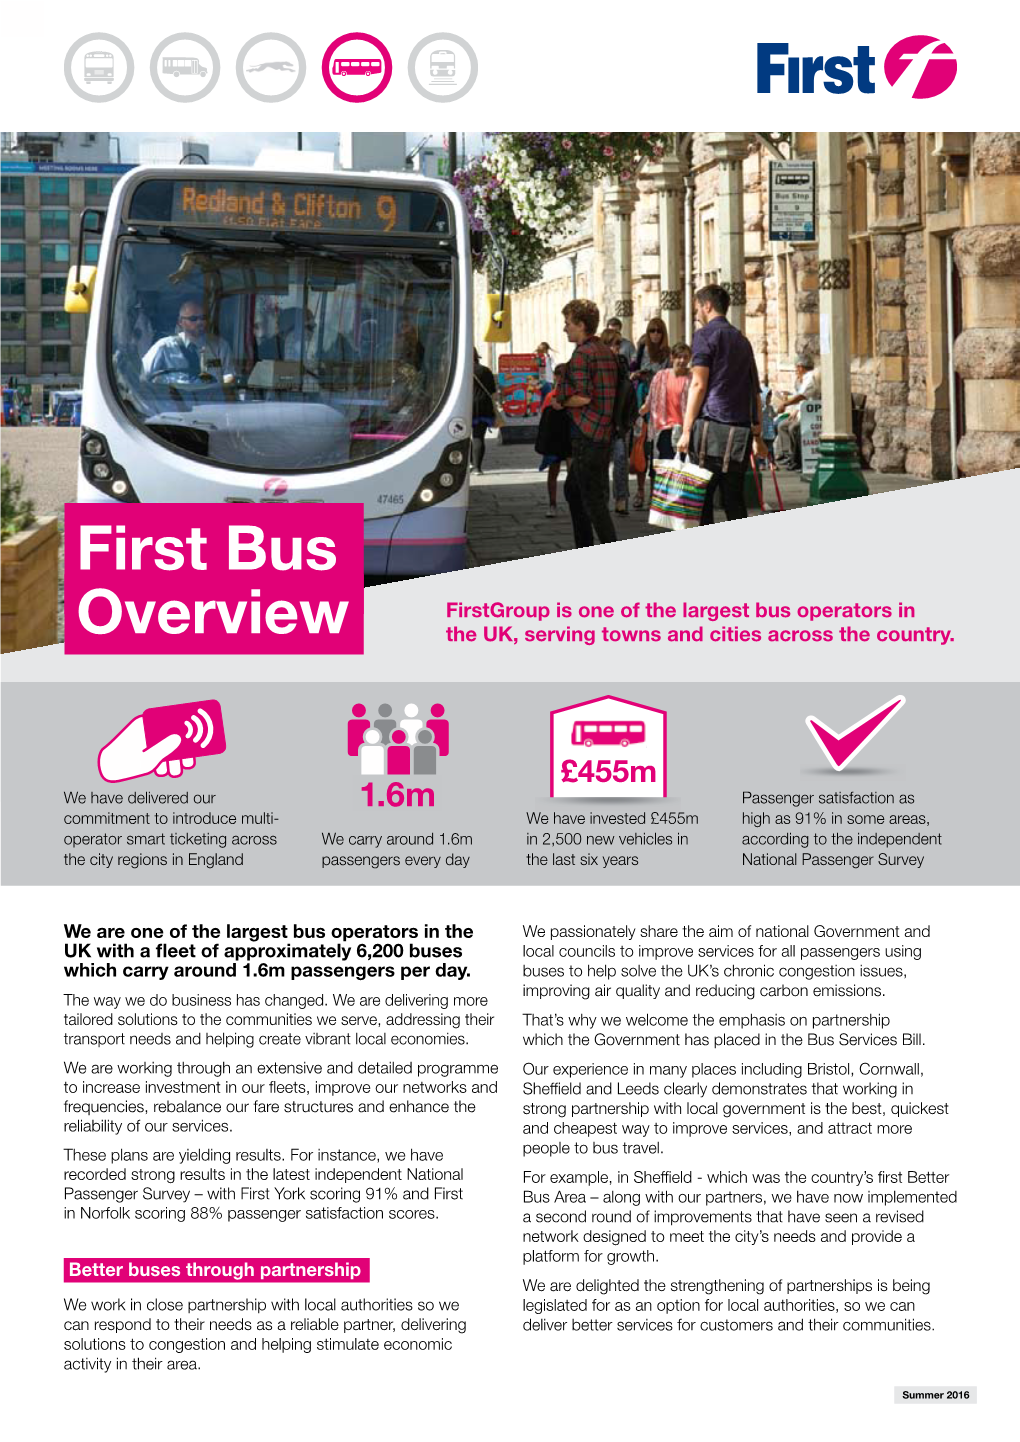 First Bus Firstgroup Is One of the Largest Bus Operators in Overview the UK, Serving Towns and Cities Across the Country